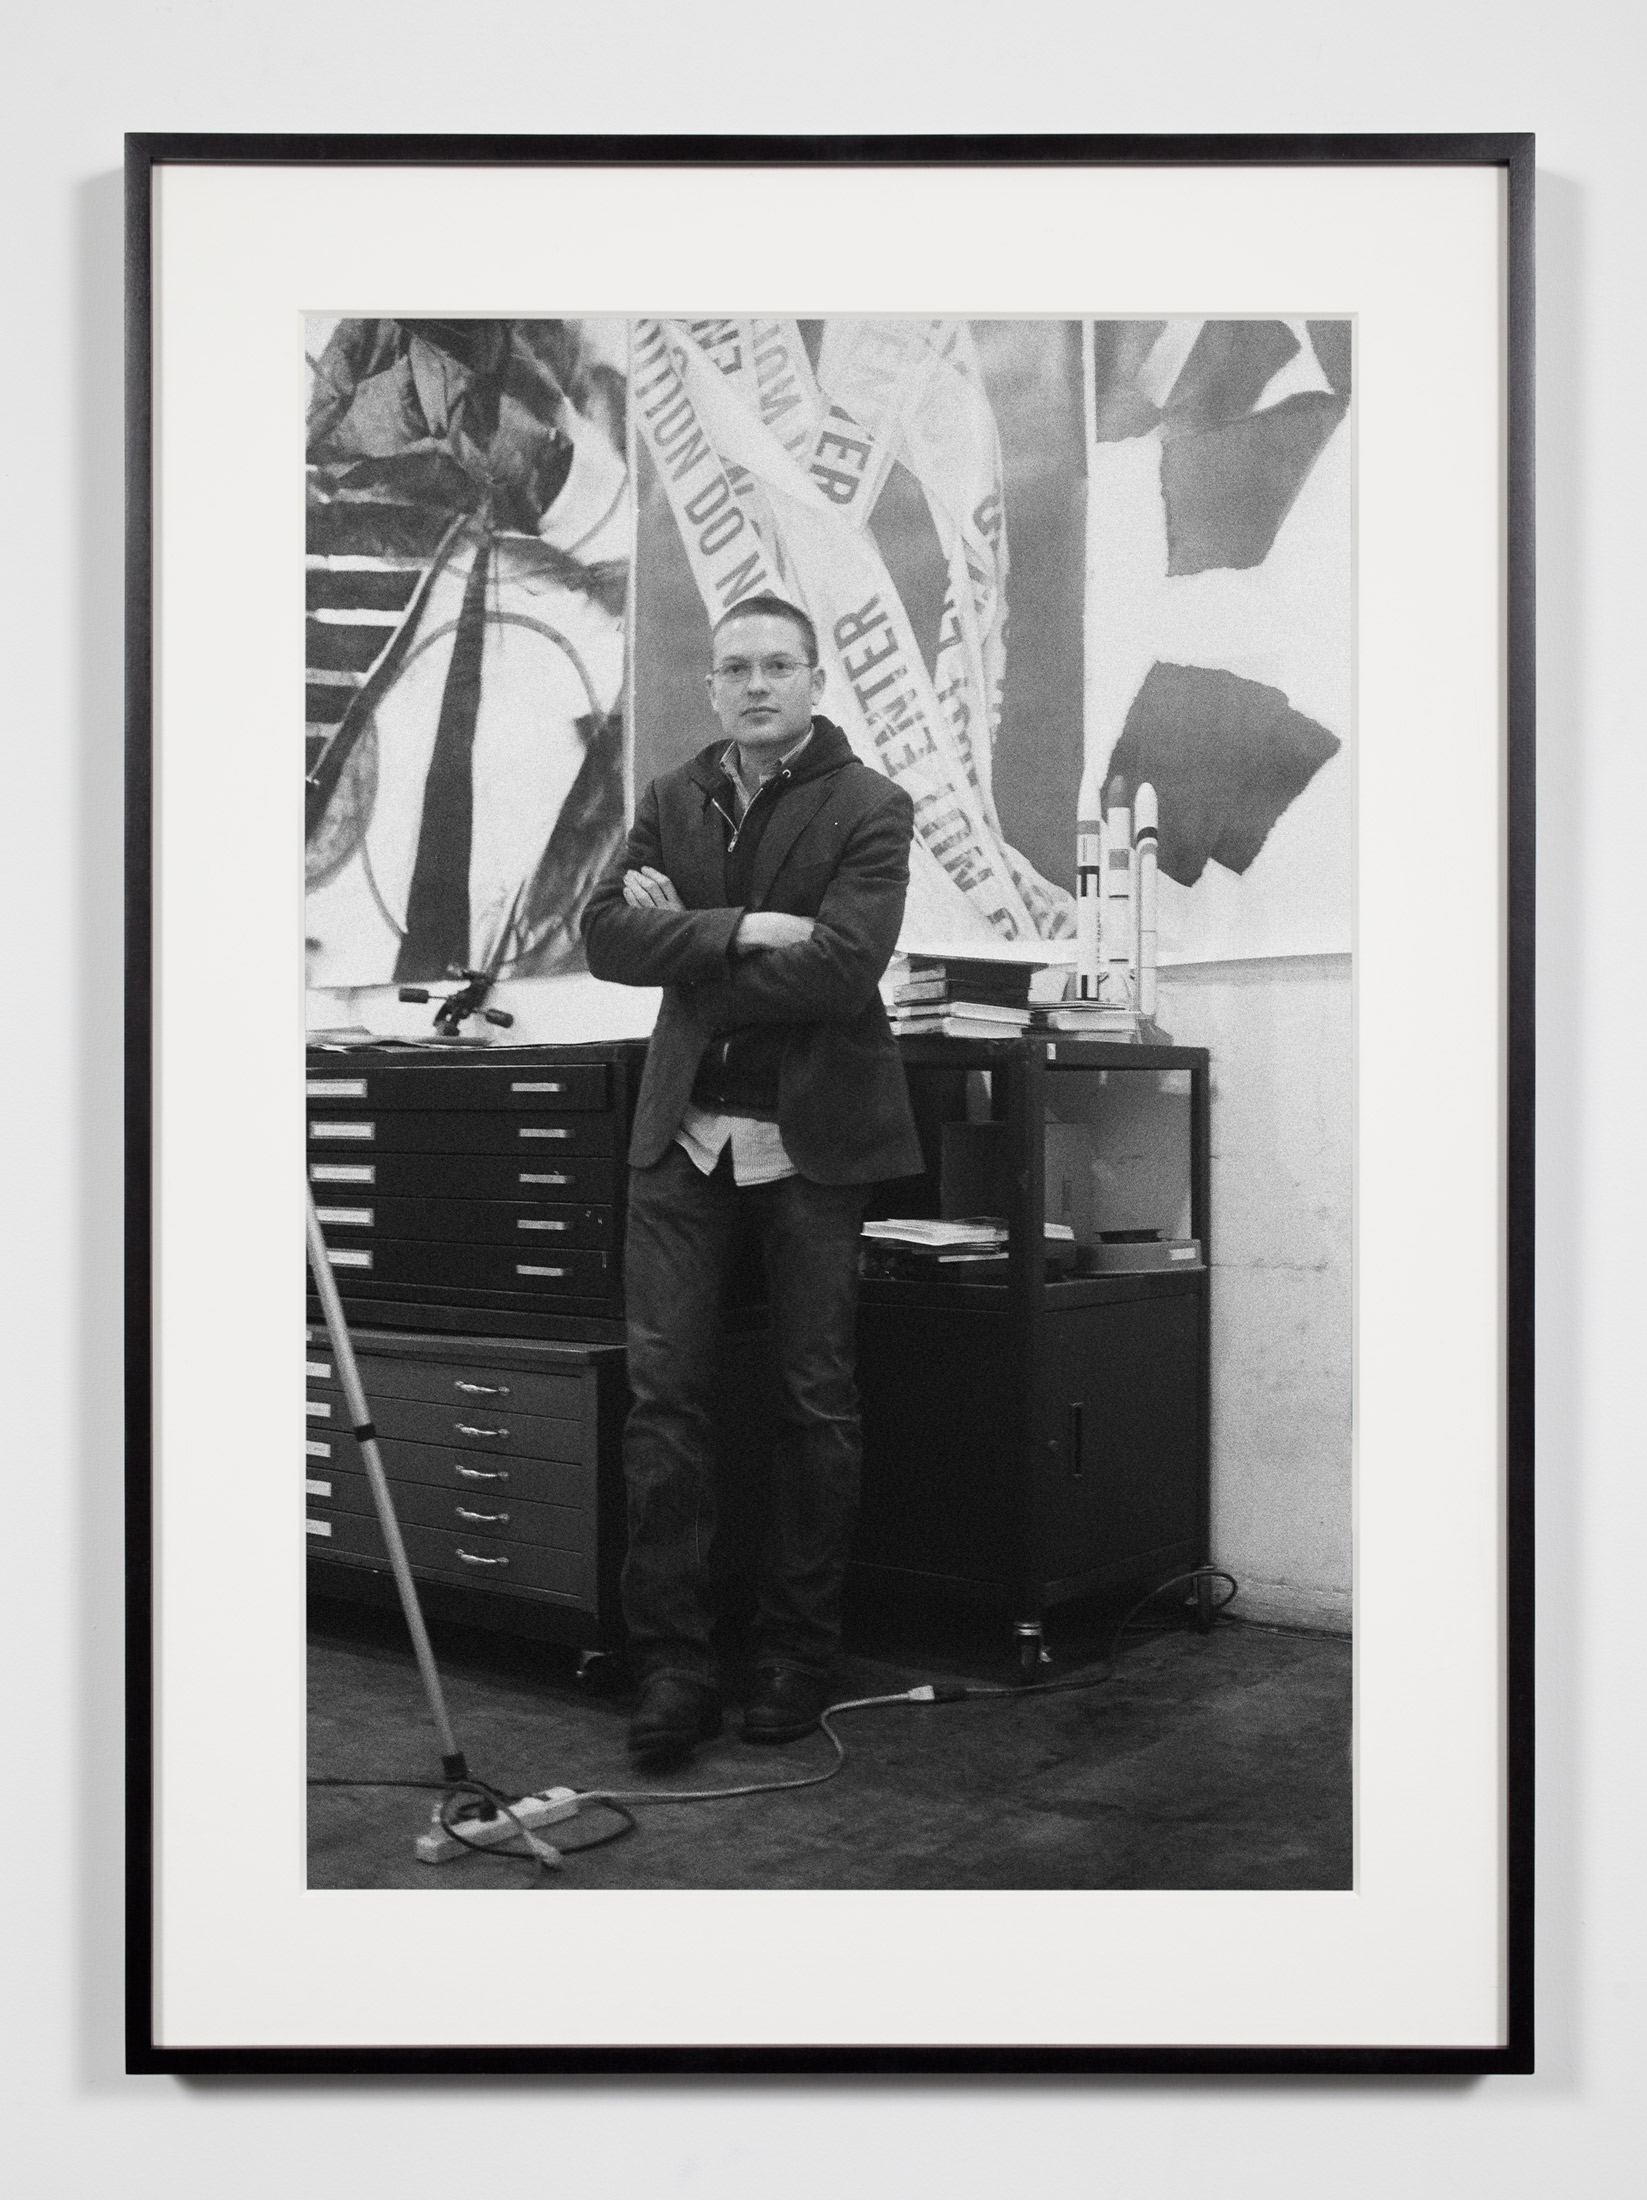   Artist, Los Angeles, California, February 8, 2009    2011   Epson Ultrachrome K3 archival ink jet print on Hahnemühle Photo Rag paper  36 3/8 x 26 3/8 inches   Industrial Portraits, 2008–     